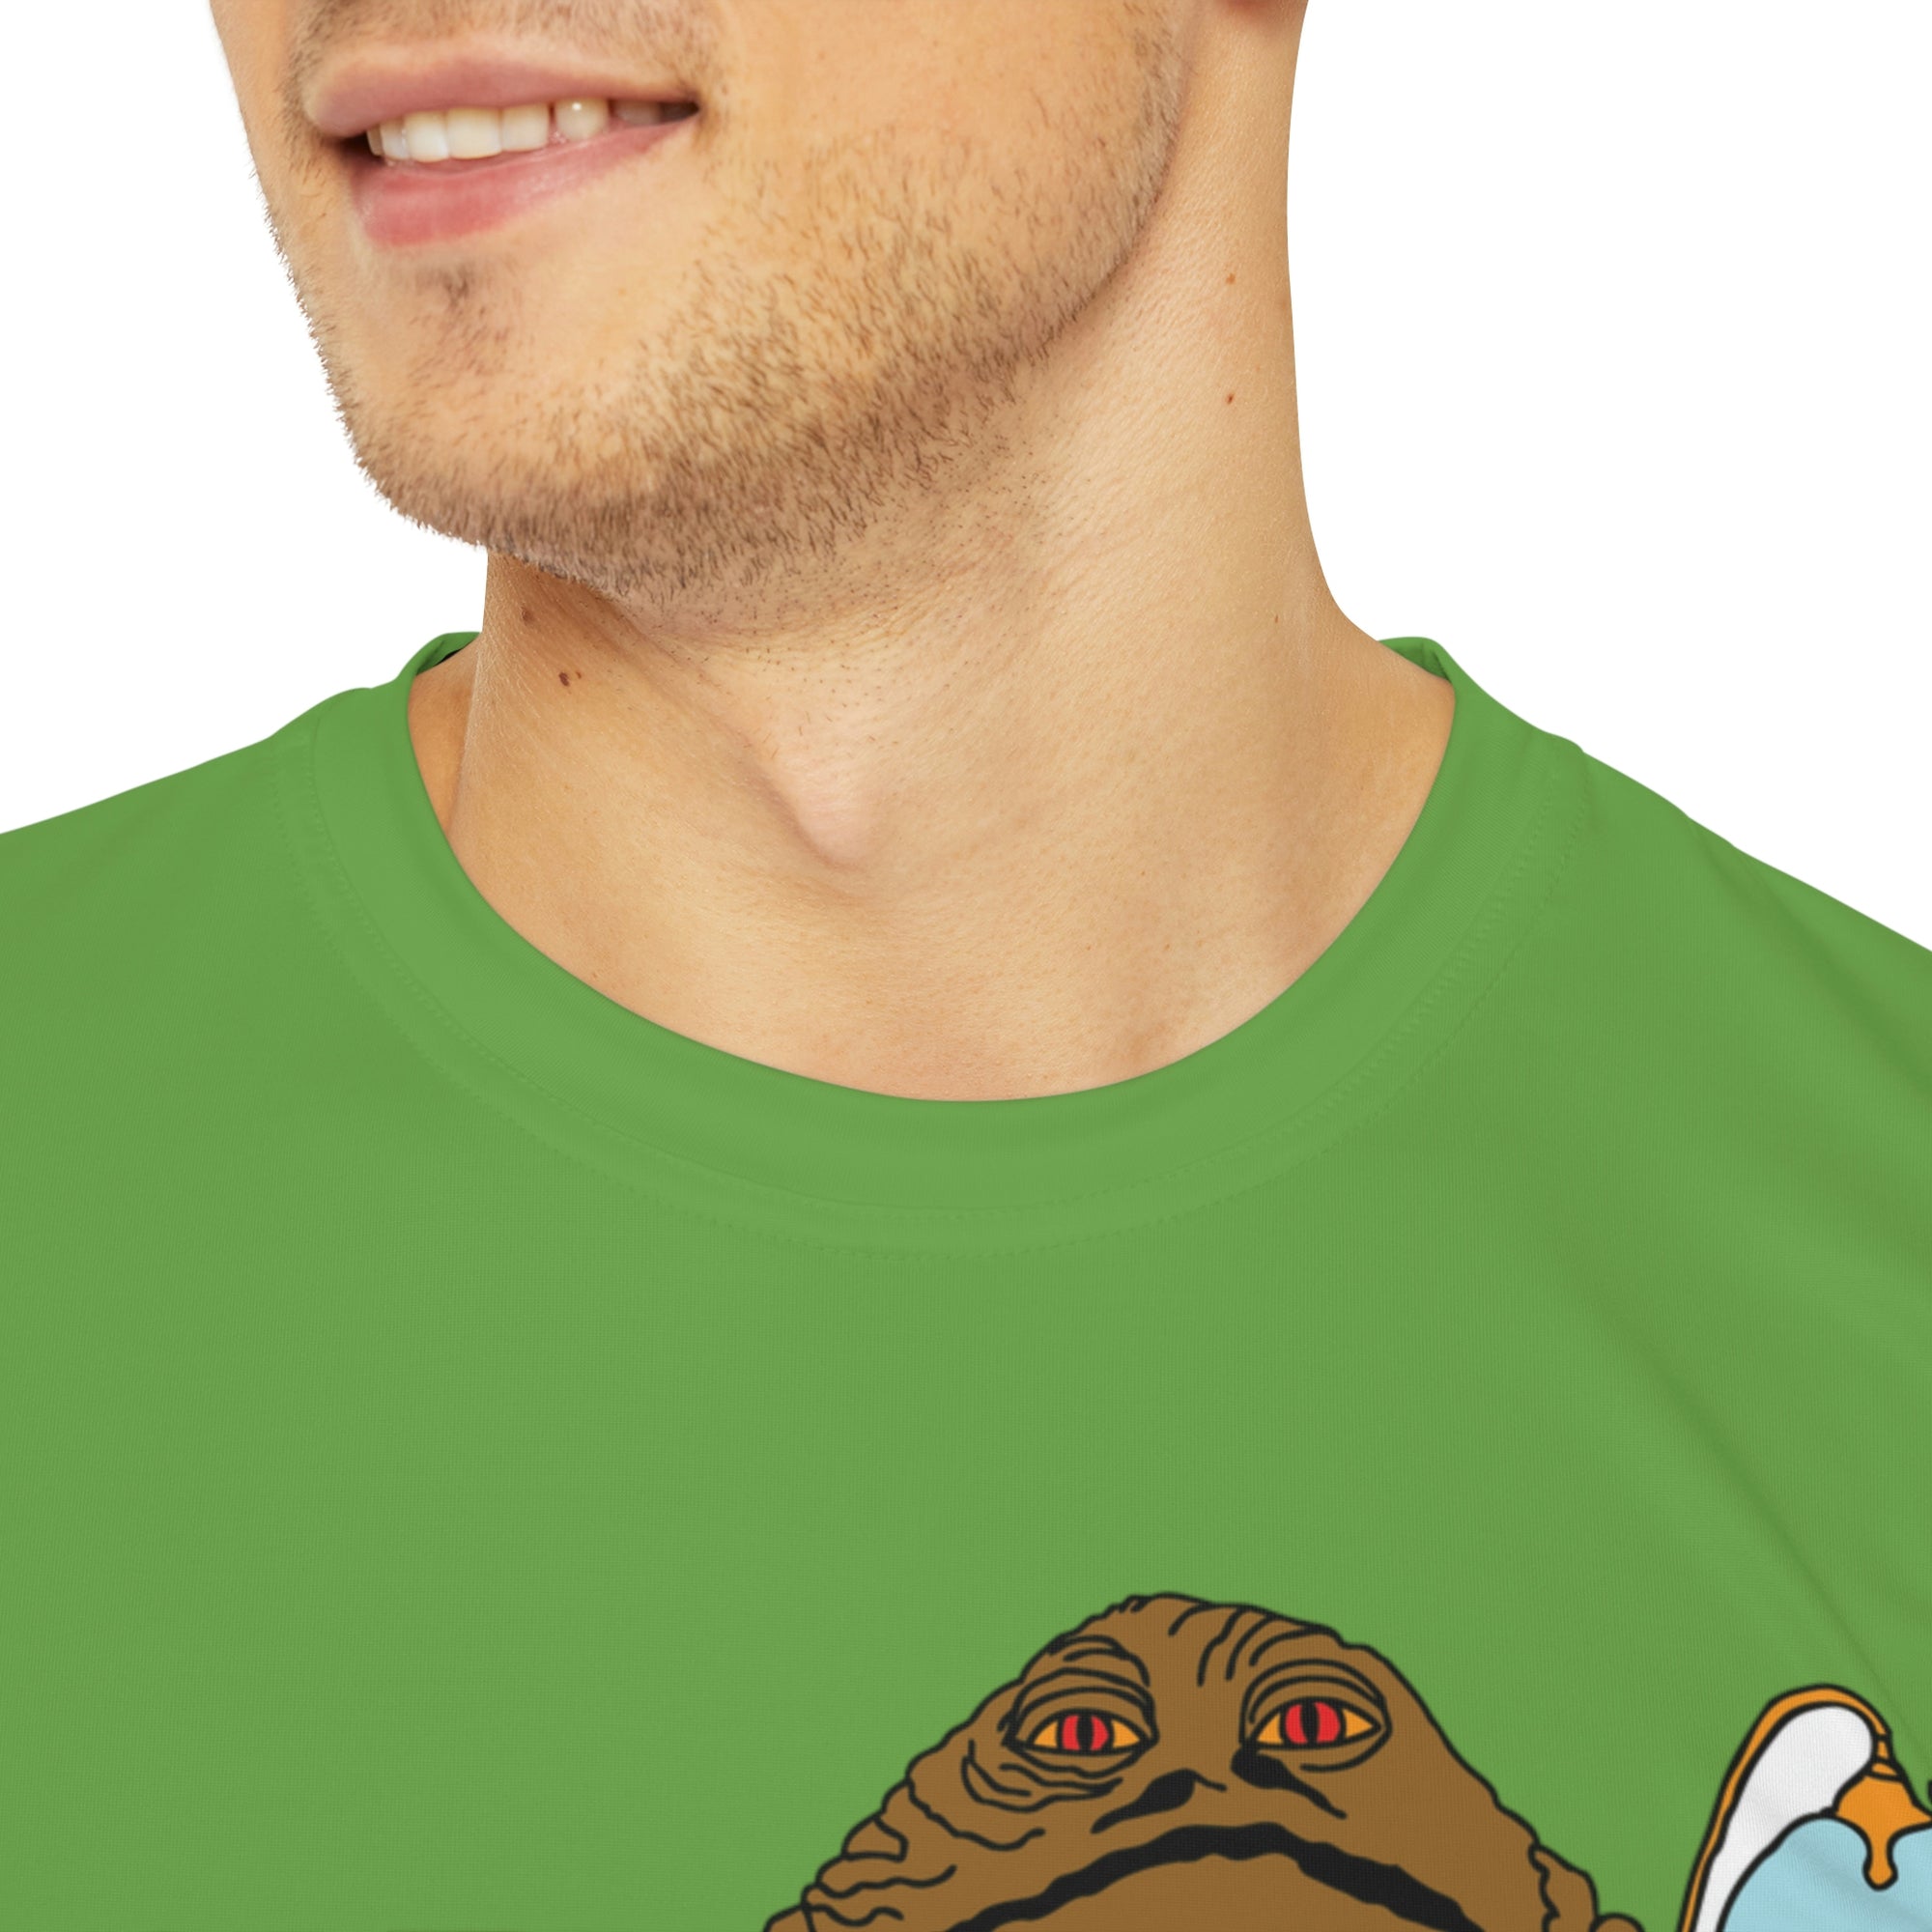 Dab Wars Weed Jedi Jabba The Dab Mando Men&#39;s Polyester Tee (AOP) By Curtis Wohlgemuth X Mythical Merch